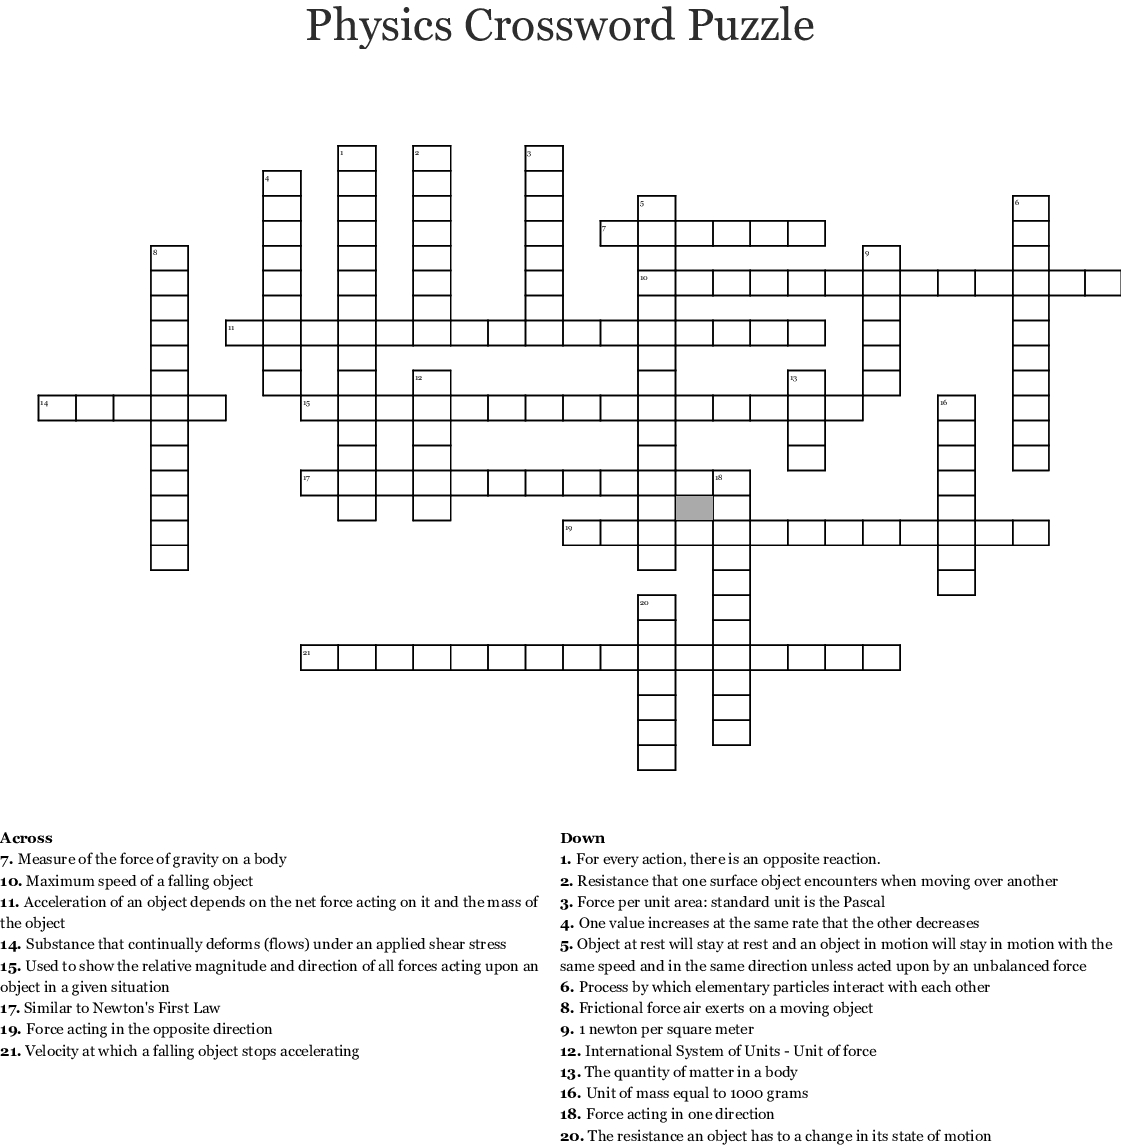 Physics Crossword Puzzle Crossword - Wordmint - Physics Crossword Puzzles Printable With Answers